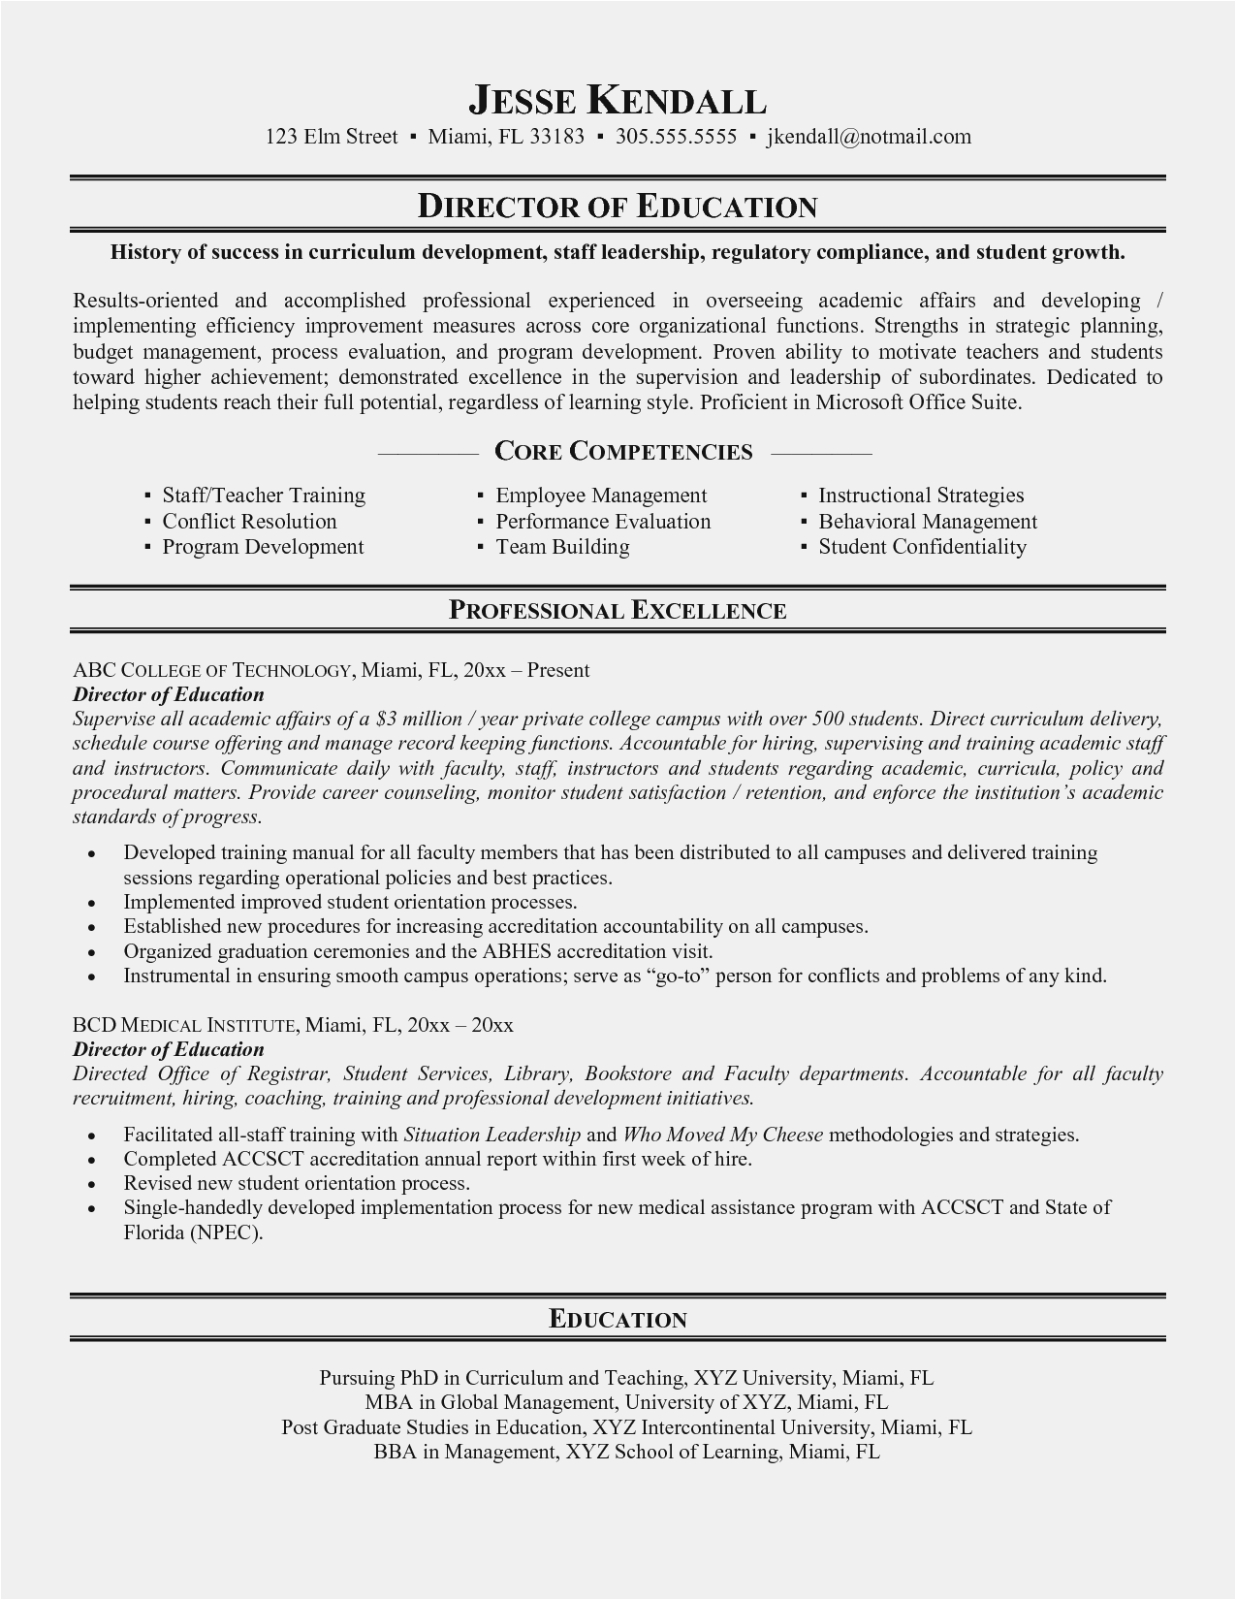 Sample Resume for Let Passer Teacher Eliminate Your Fears and